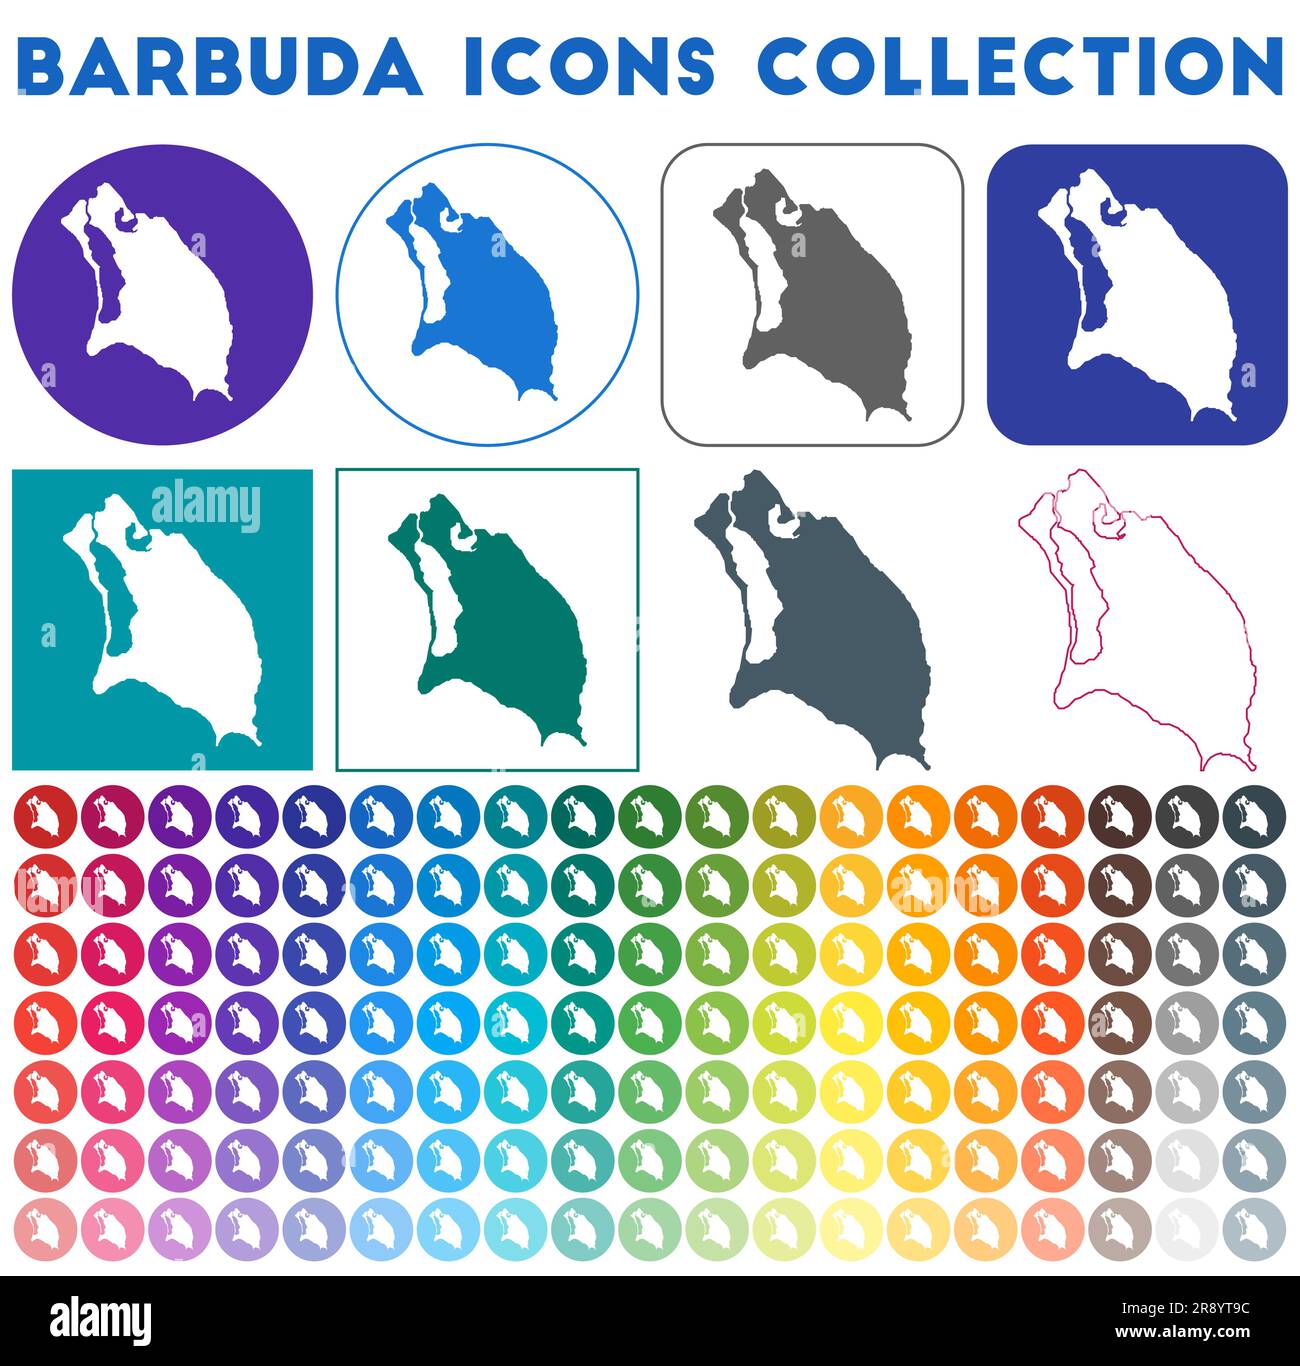 Barbuda icons collection. Bright colourful trendy map icons. Modern Barbuda badge with island map. Vector illustration. Stock Vector